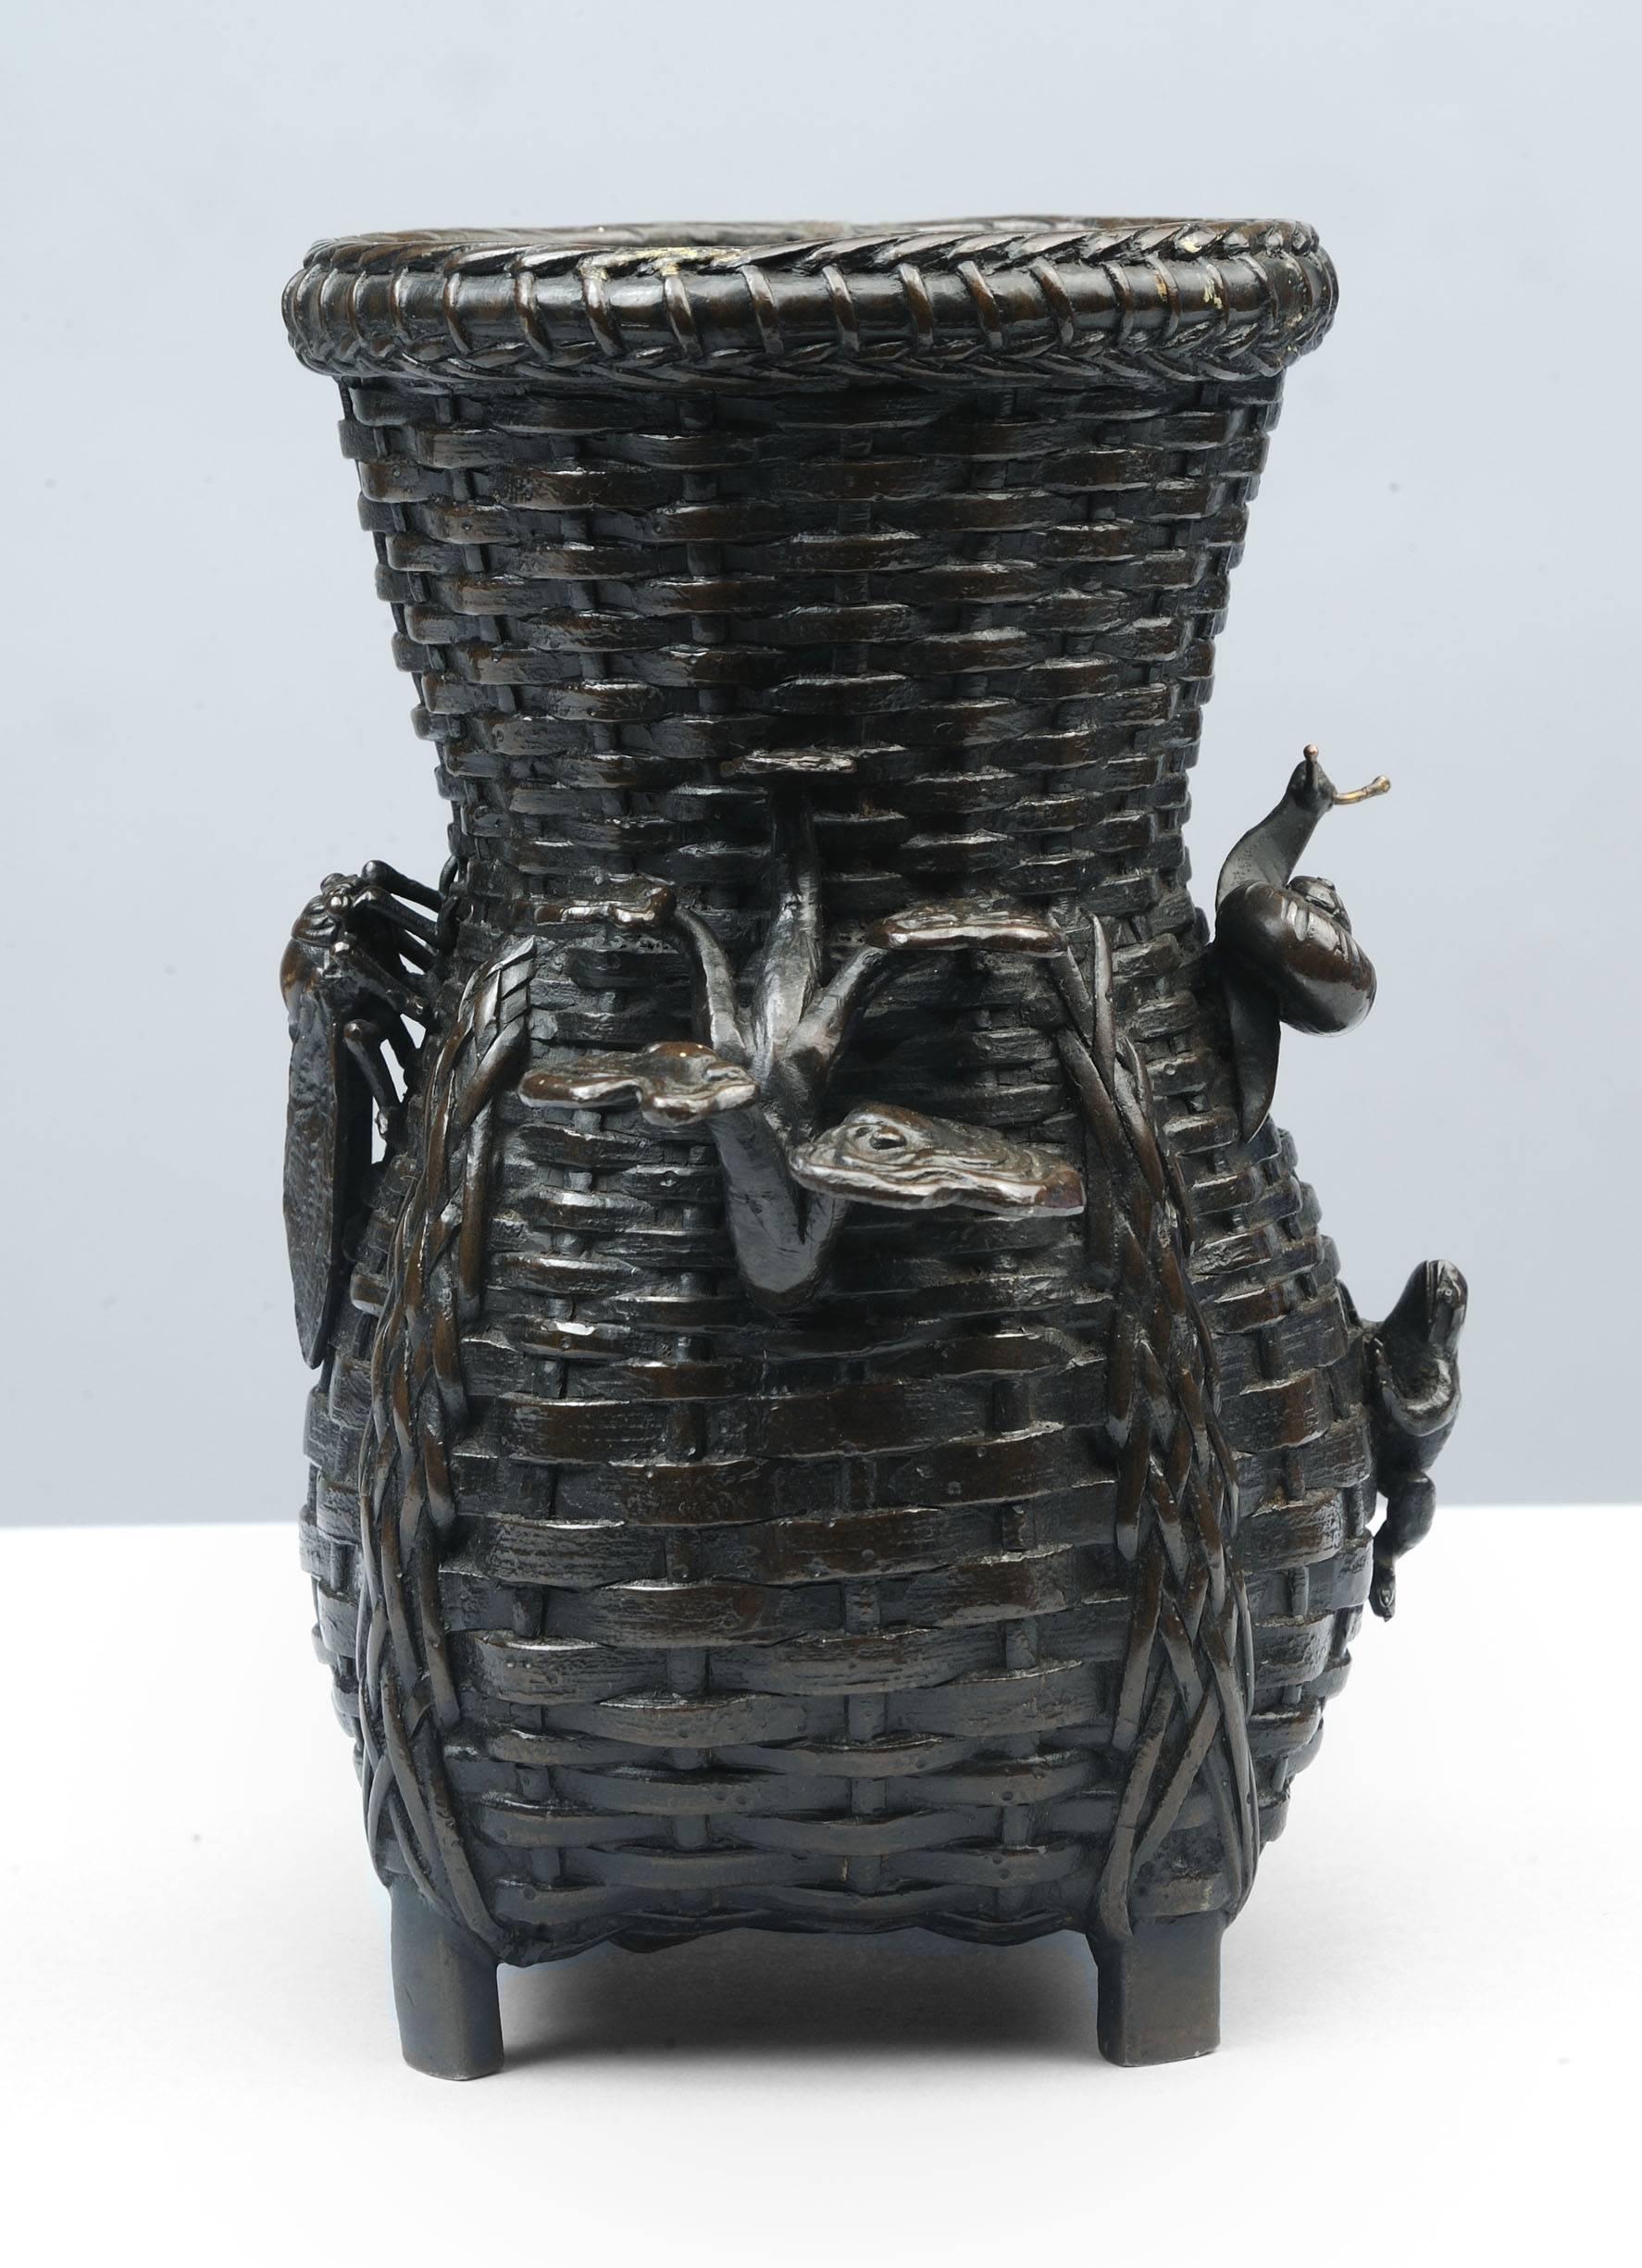 This rare and unusual pair of Meiji era (1868-1911) basket weave bronze vases is decorated with a crickets, frogs and snails. Fine condition with beautiful patination.